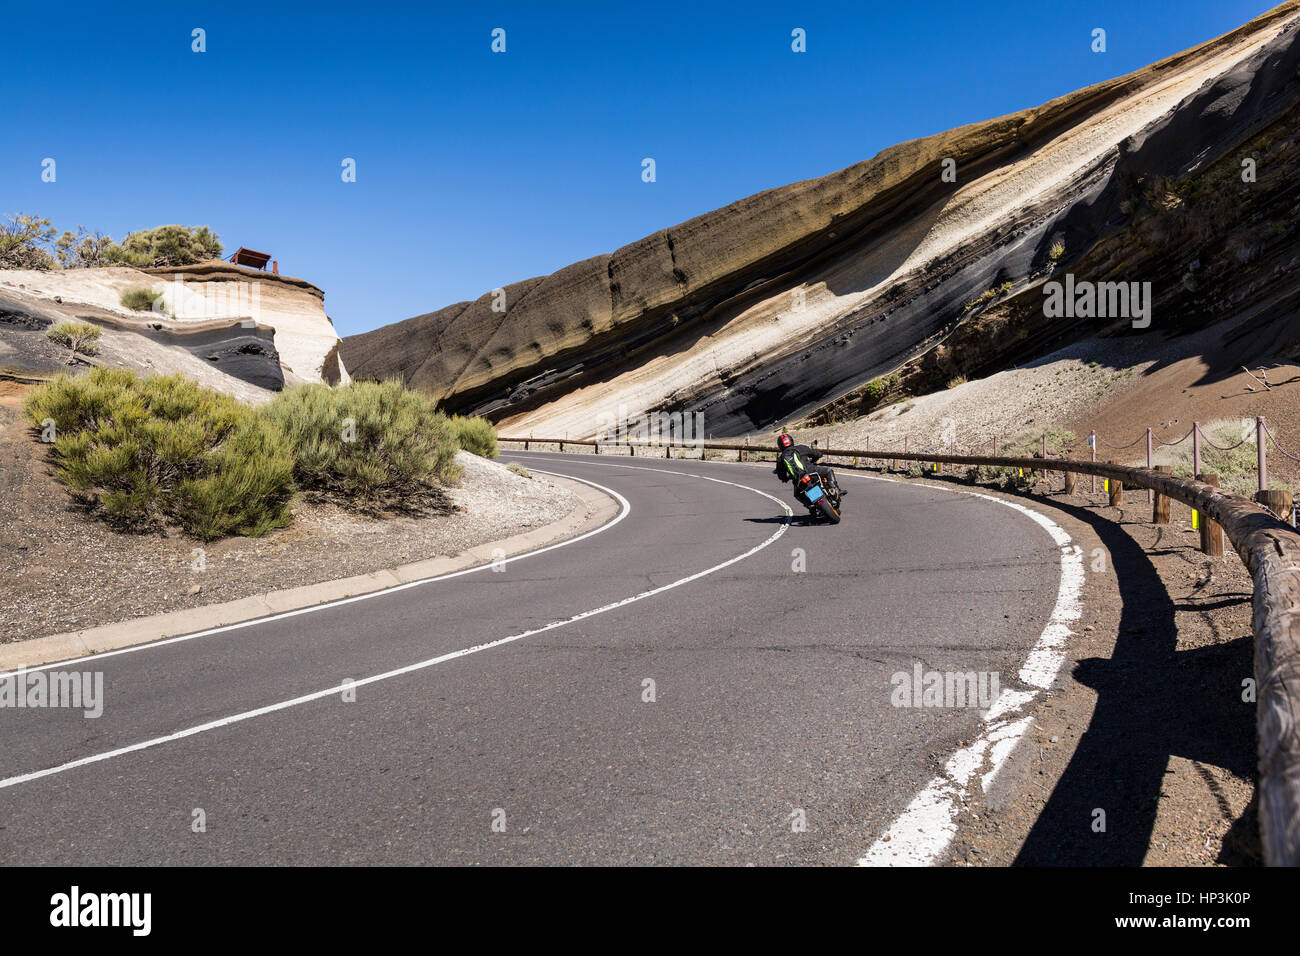 Motorcycle leaning over into a bend at the curva de la tarta on the road to the national park, las canadas del teide, tenerife, canary islands, spain Stock Photo